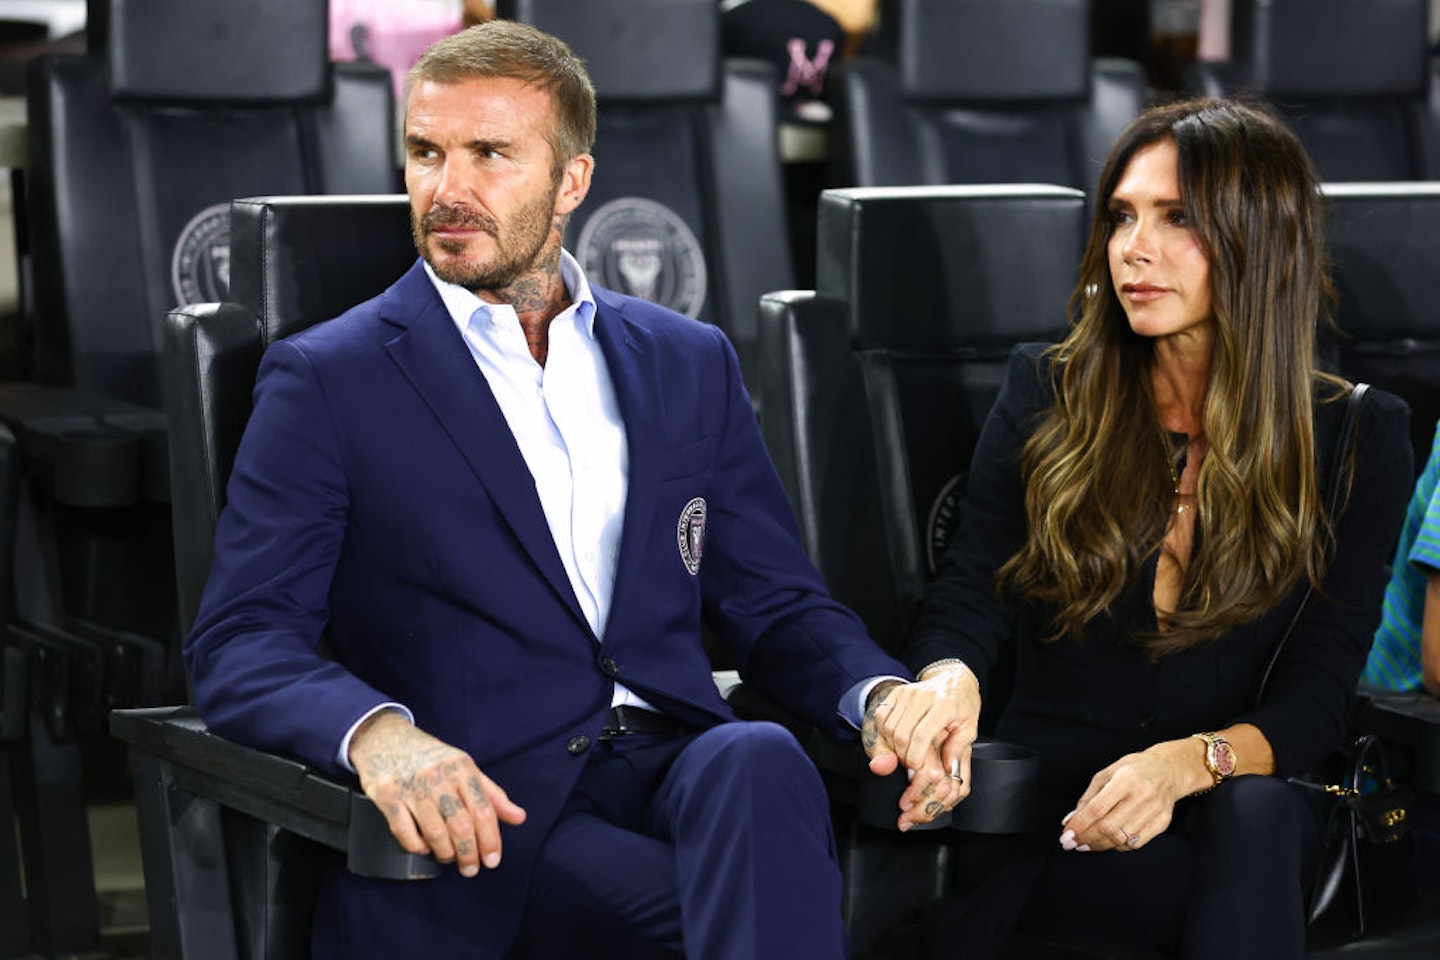 David and Victoria Beckham were last photographed together in October at Inter Miami game